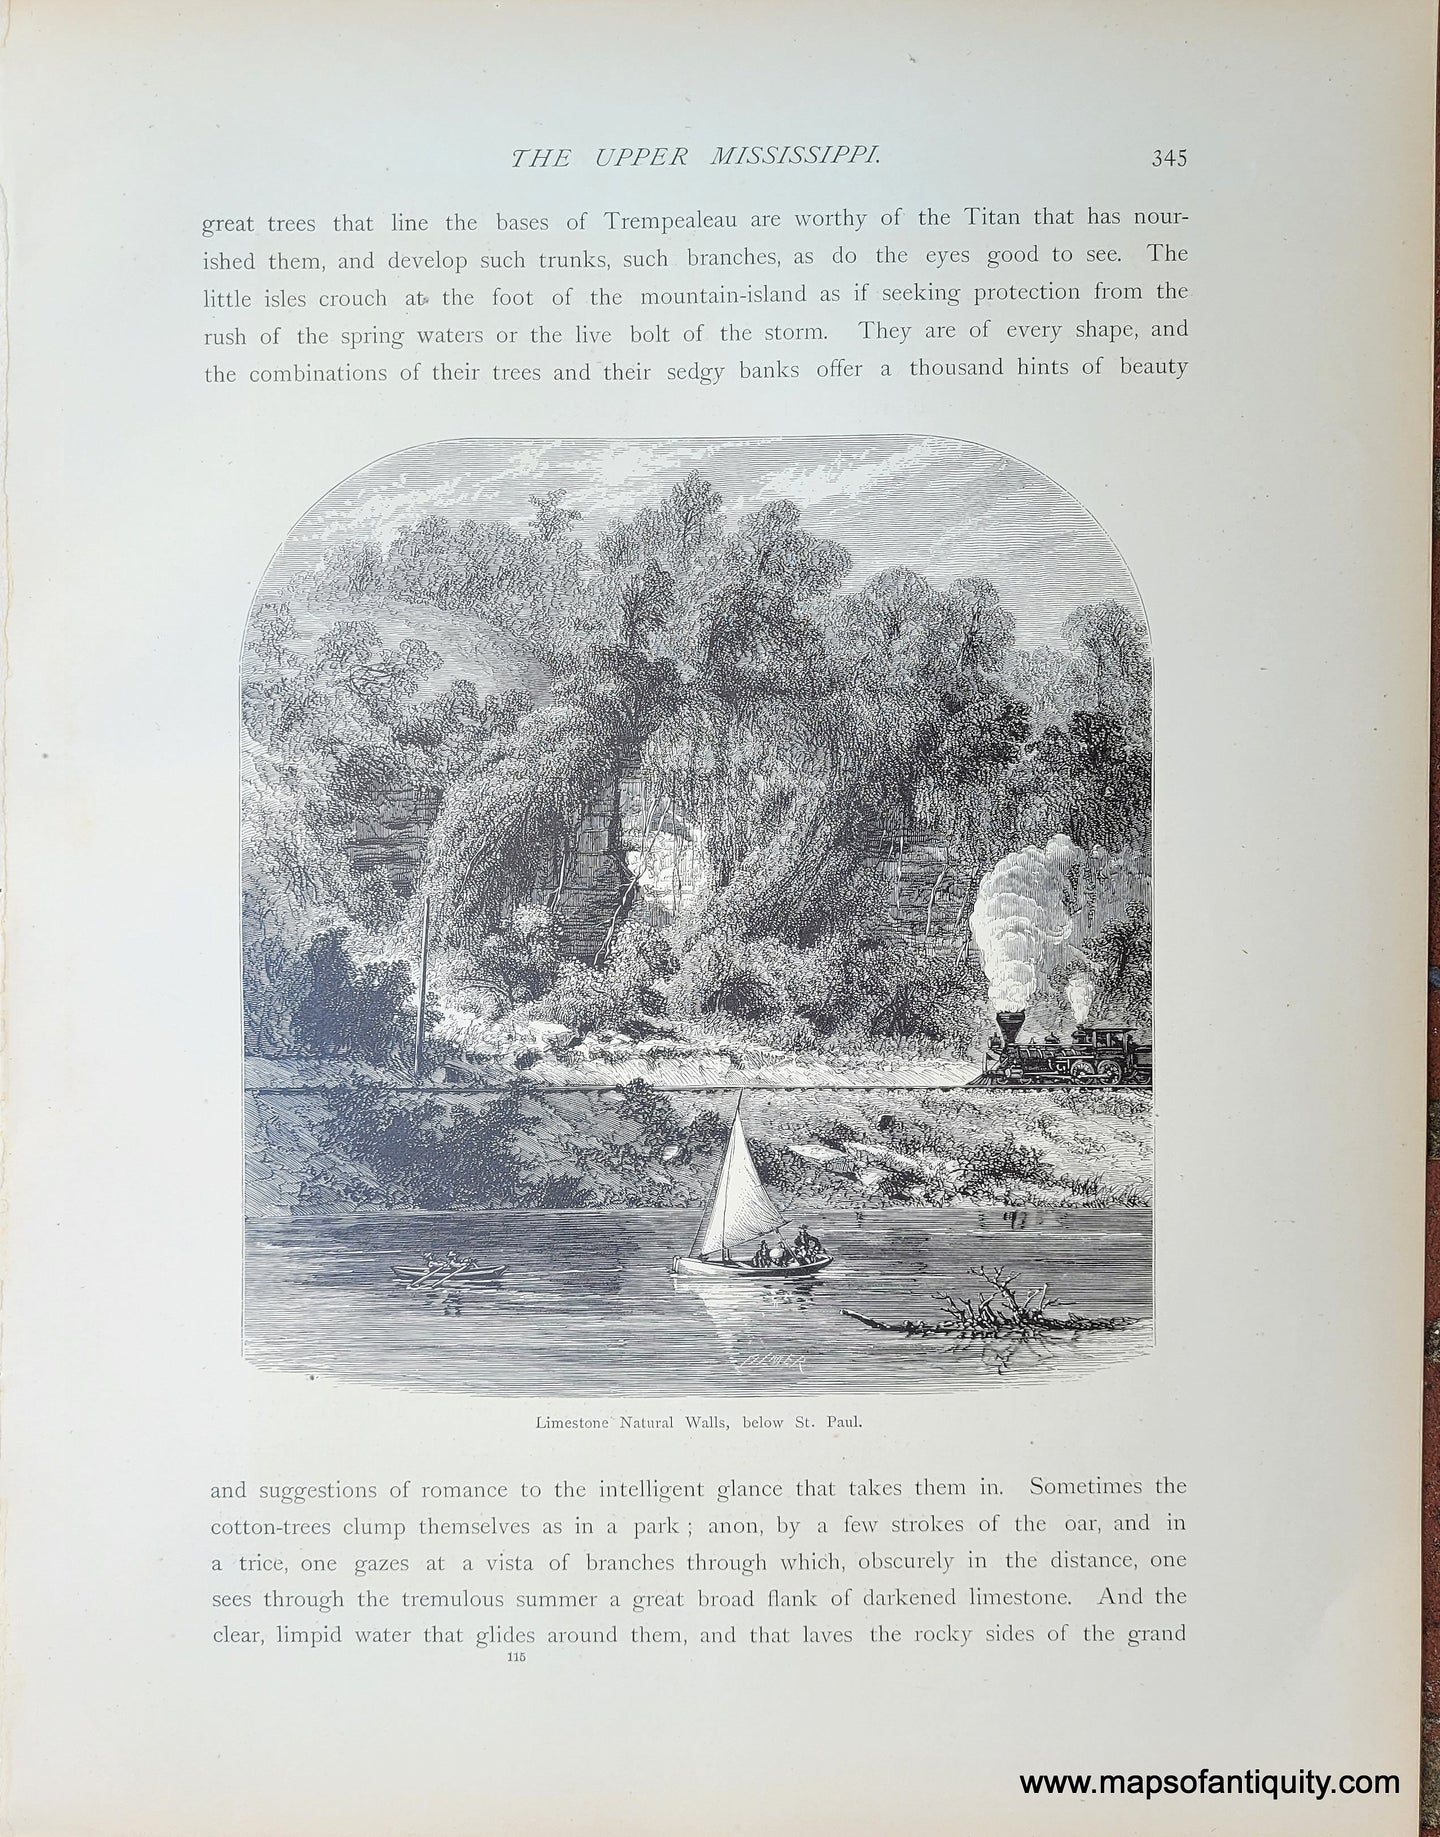 black and white page with text at top and bottom and an image in the middle, which shows a scene on the Mississippi river with a sailboat in the foreground, and a train engine in the middleground, and trees in the background